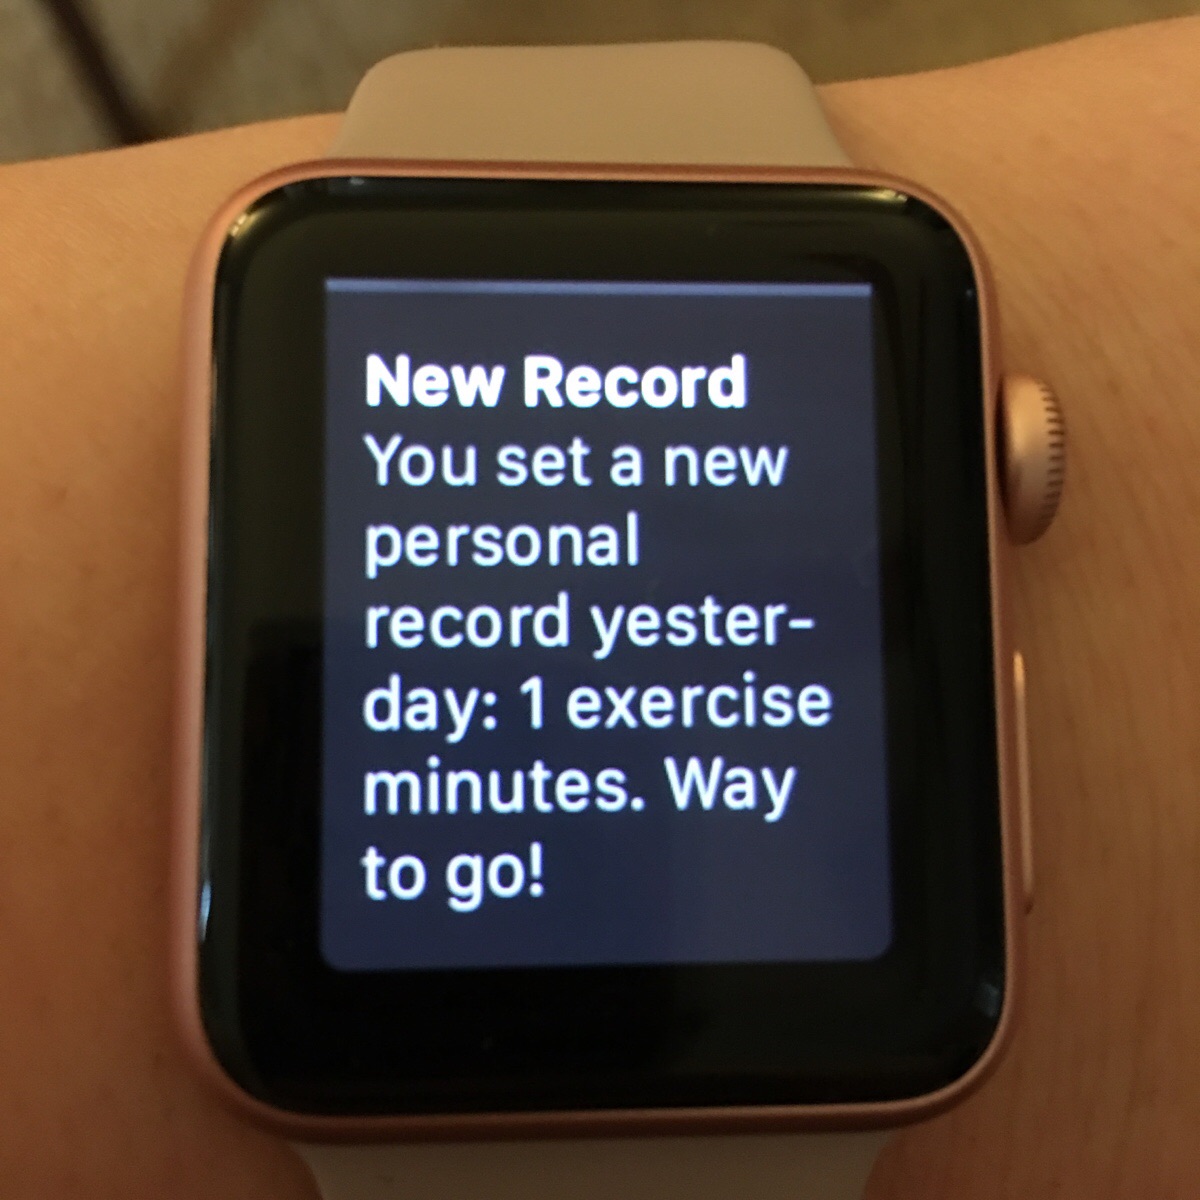 funny apple watch meme - New Record You set a new personal record yester day 1 exercise minutes. Way to go!